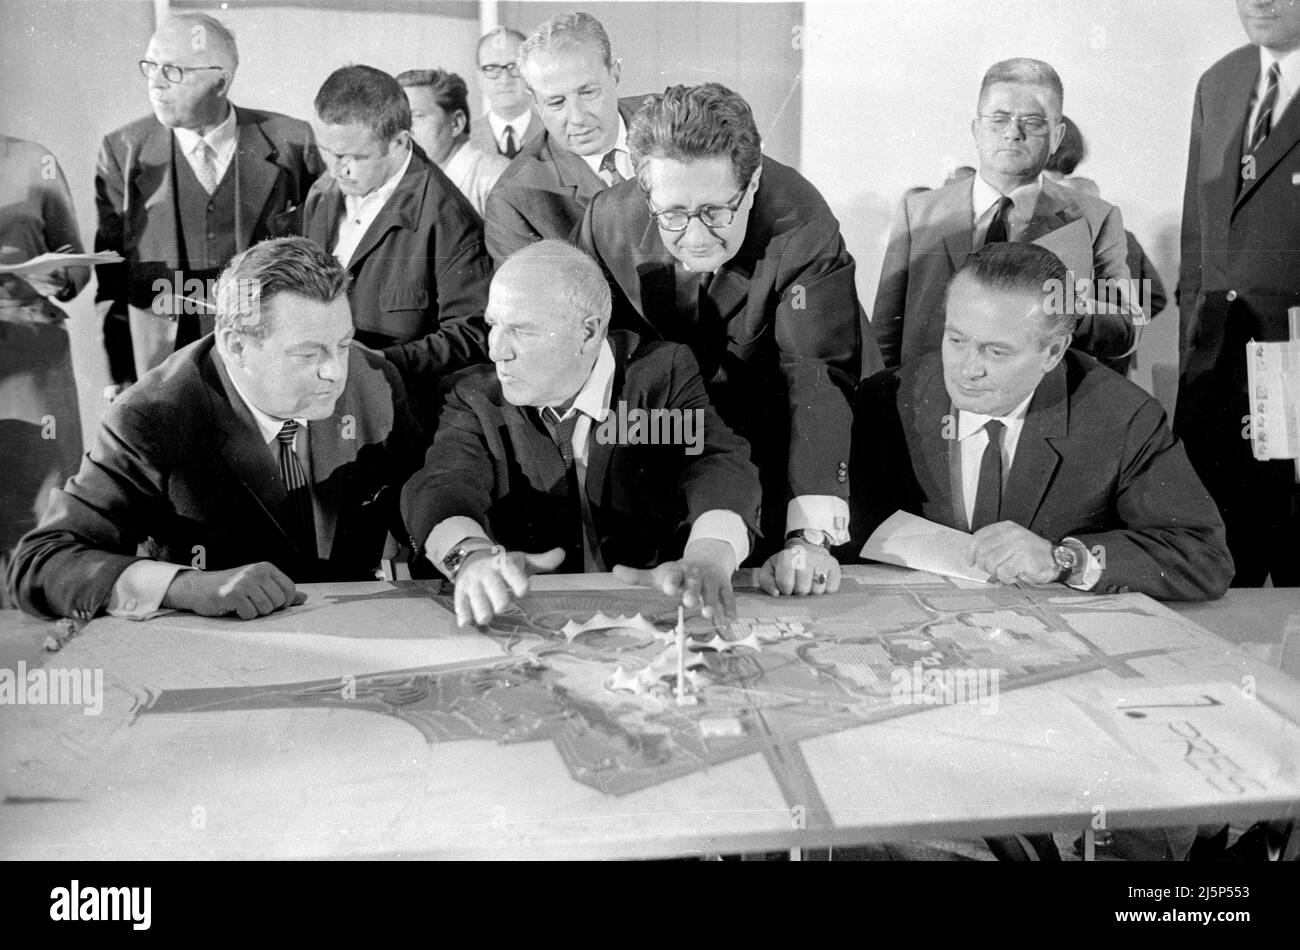 Meeting and press conference of the jury for the decision on the architectural competition for the Munich Olympic buildings in Hall 1 of the Exhibition Park: Franz Josef Strauß, Egon Eiermann, Hans Jochen Vogel and Will Daume. [automated translation] Stock Photo